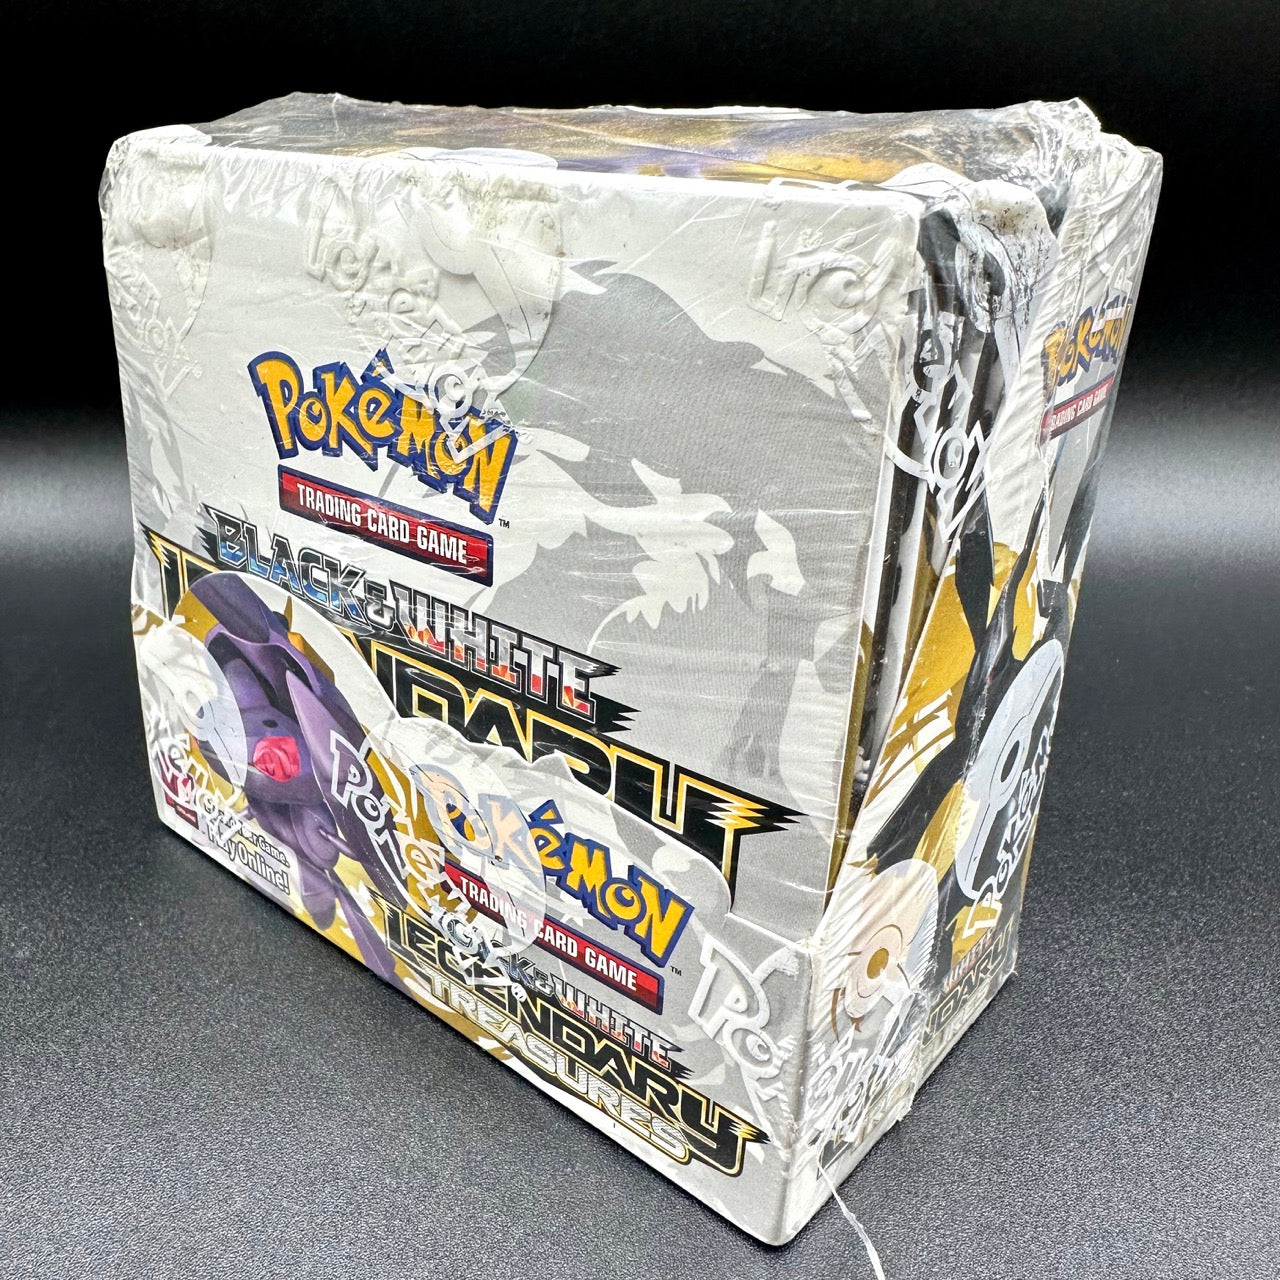 
                  
                    Image of Pokémon Legendary Treasures Booster Box containing 36 packs, each with 10 random cards from the Legendary Treasures expansion, offering an exciting collecting experience for Pokémon enthusiasts.
                  
                